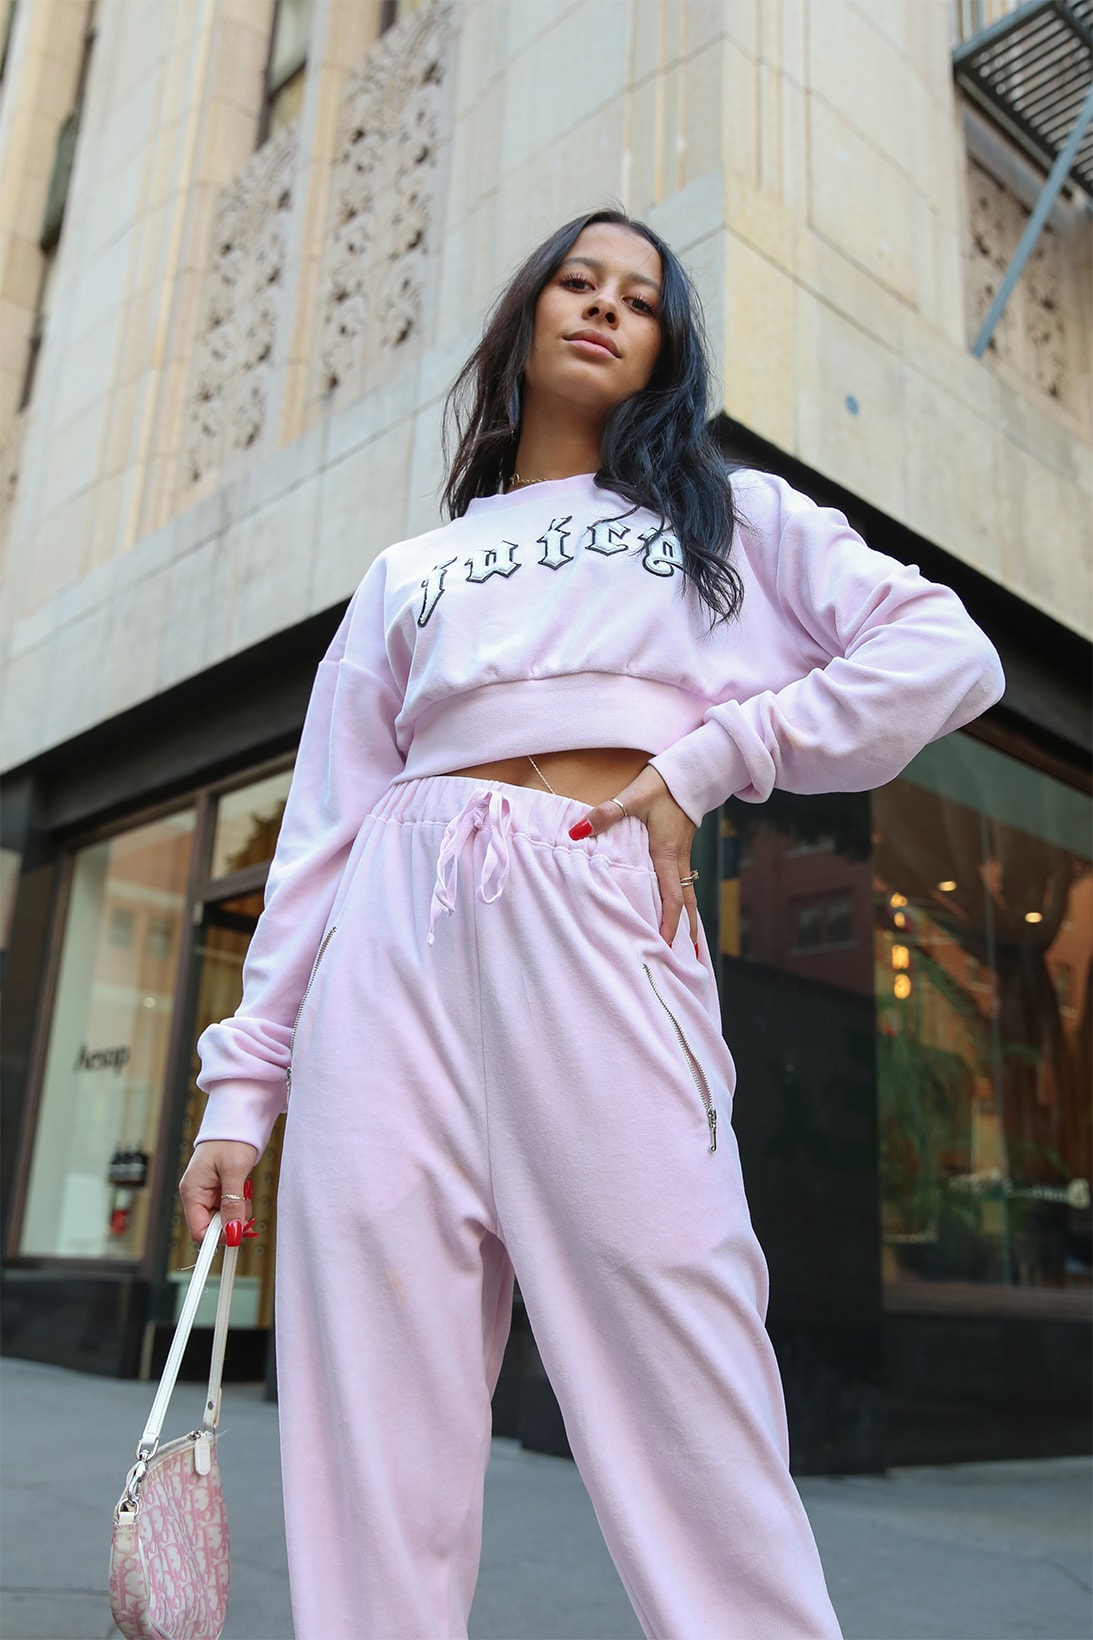 6 Women Wore Juicy Couture Tracksuits to Work and Everything Got Better